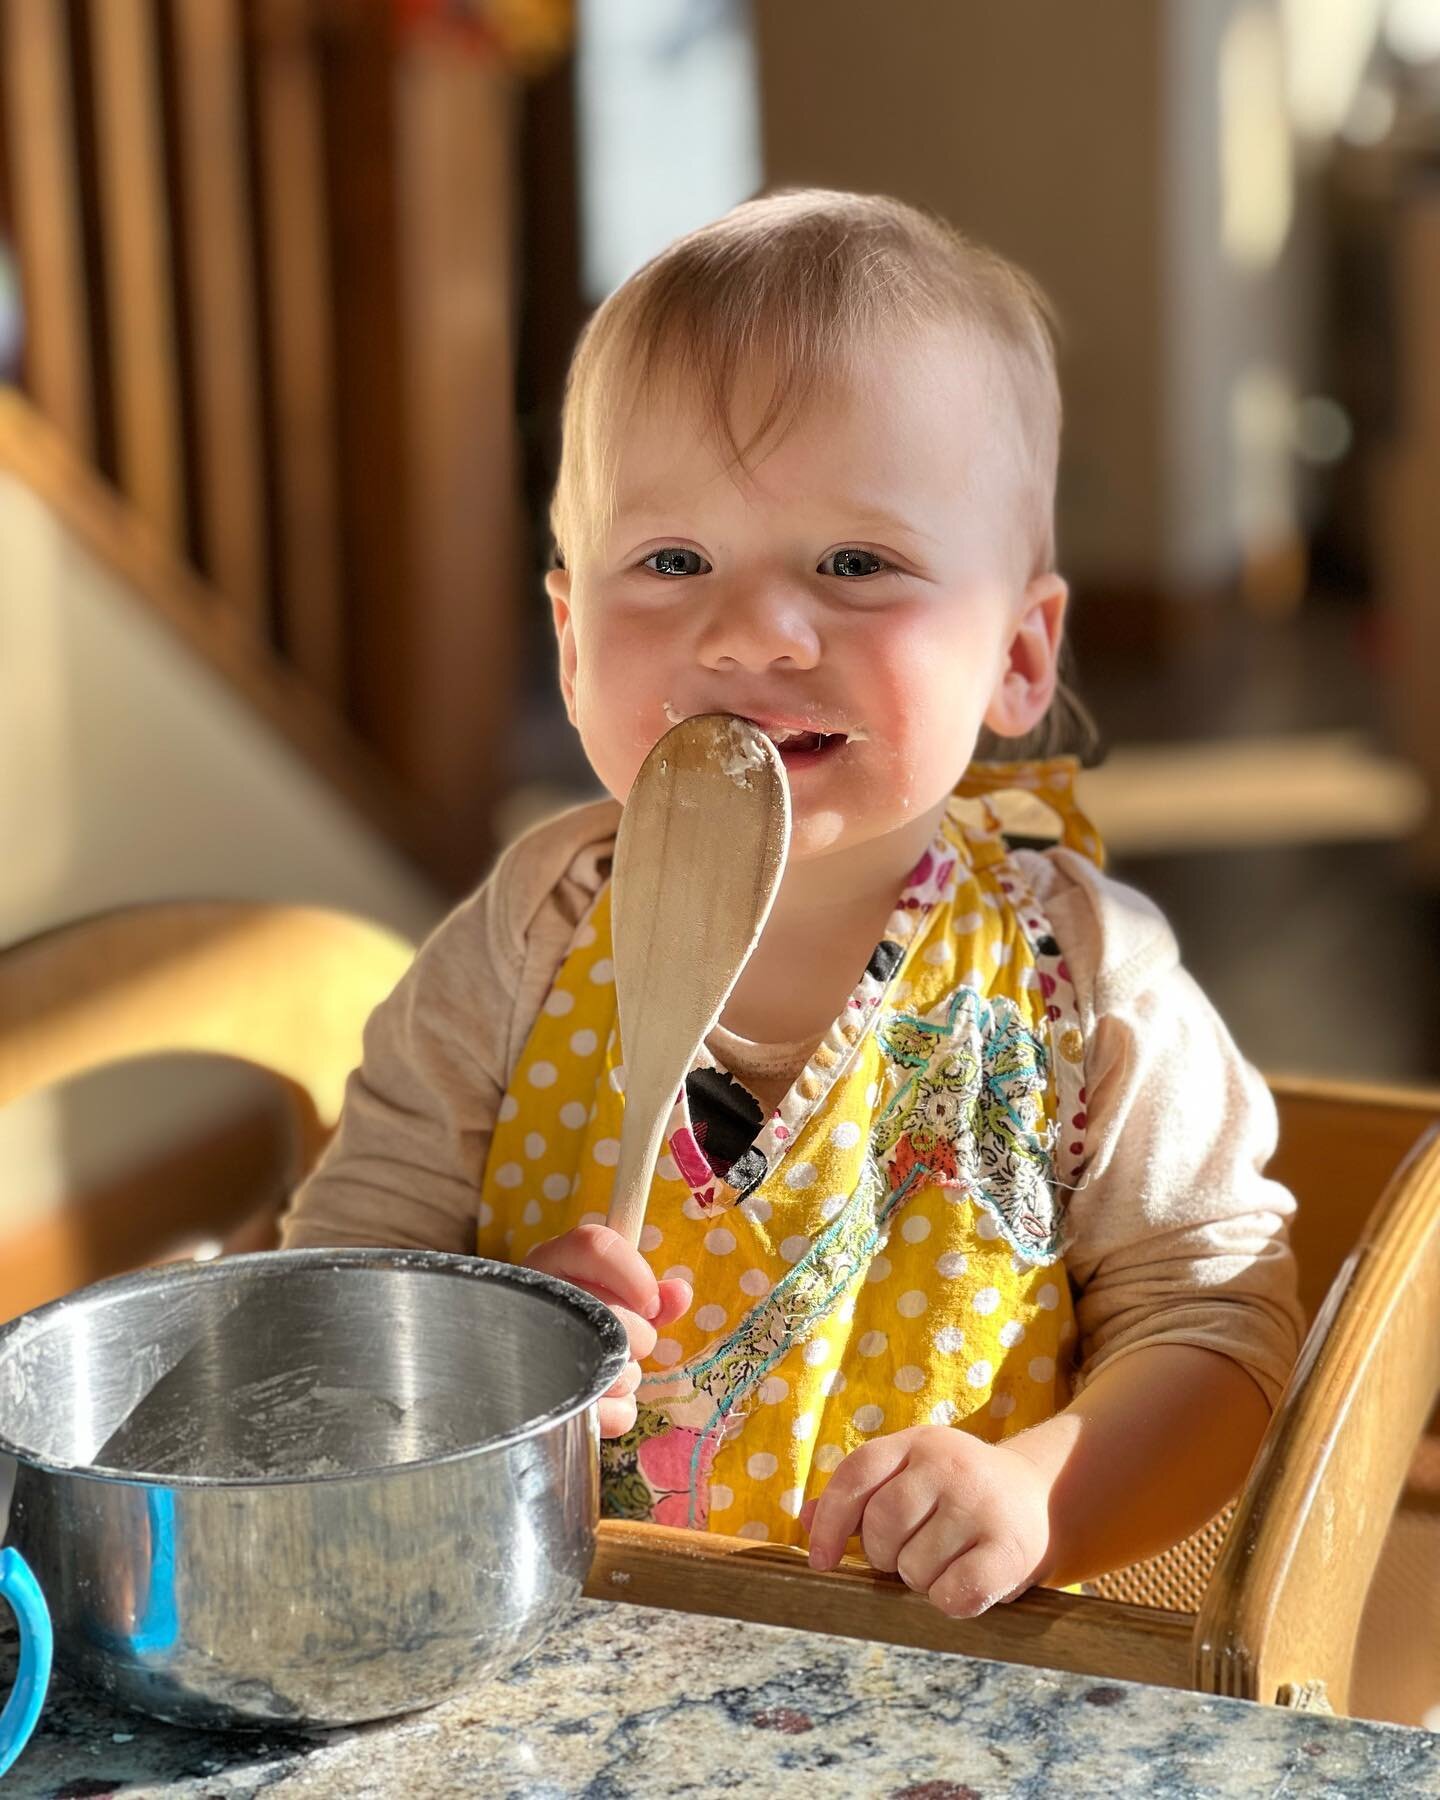 The cutest little baking assistant today! Making bread with Esmae today:) #kidsbaking #teachemyoung #gatherroundthetable